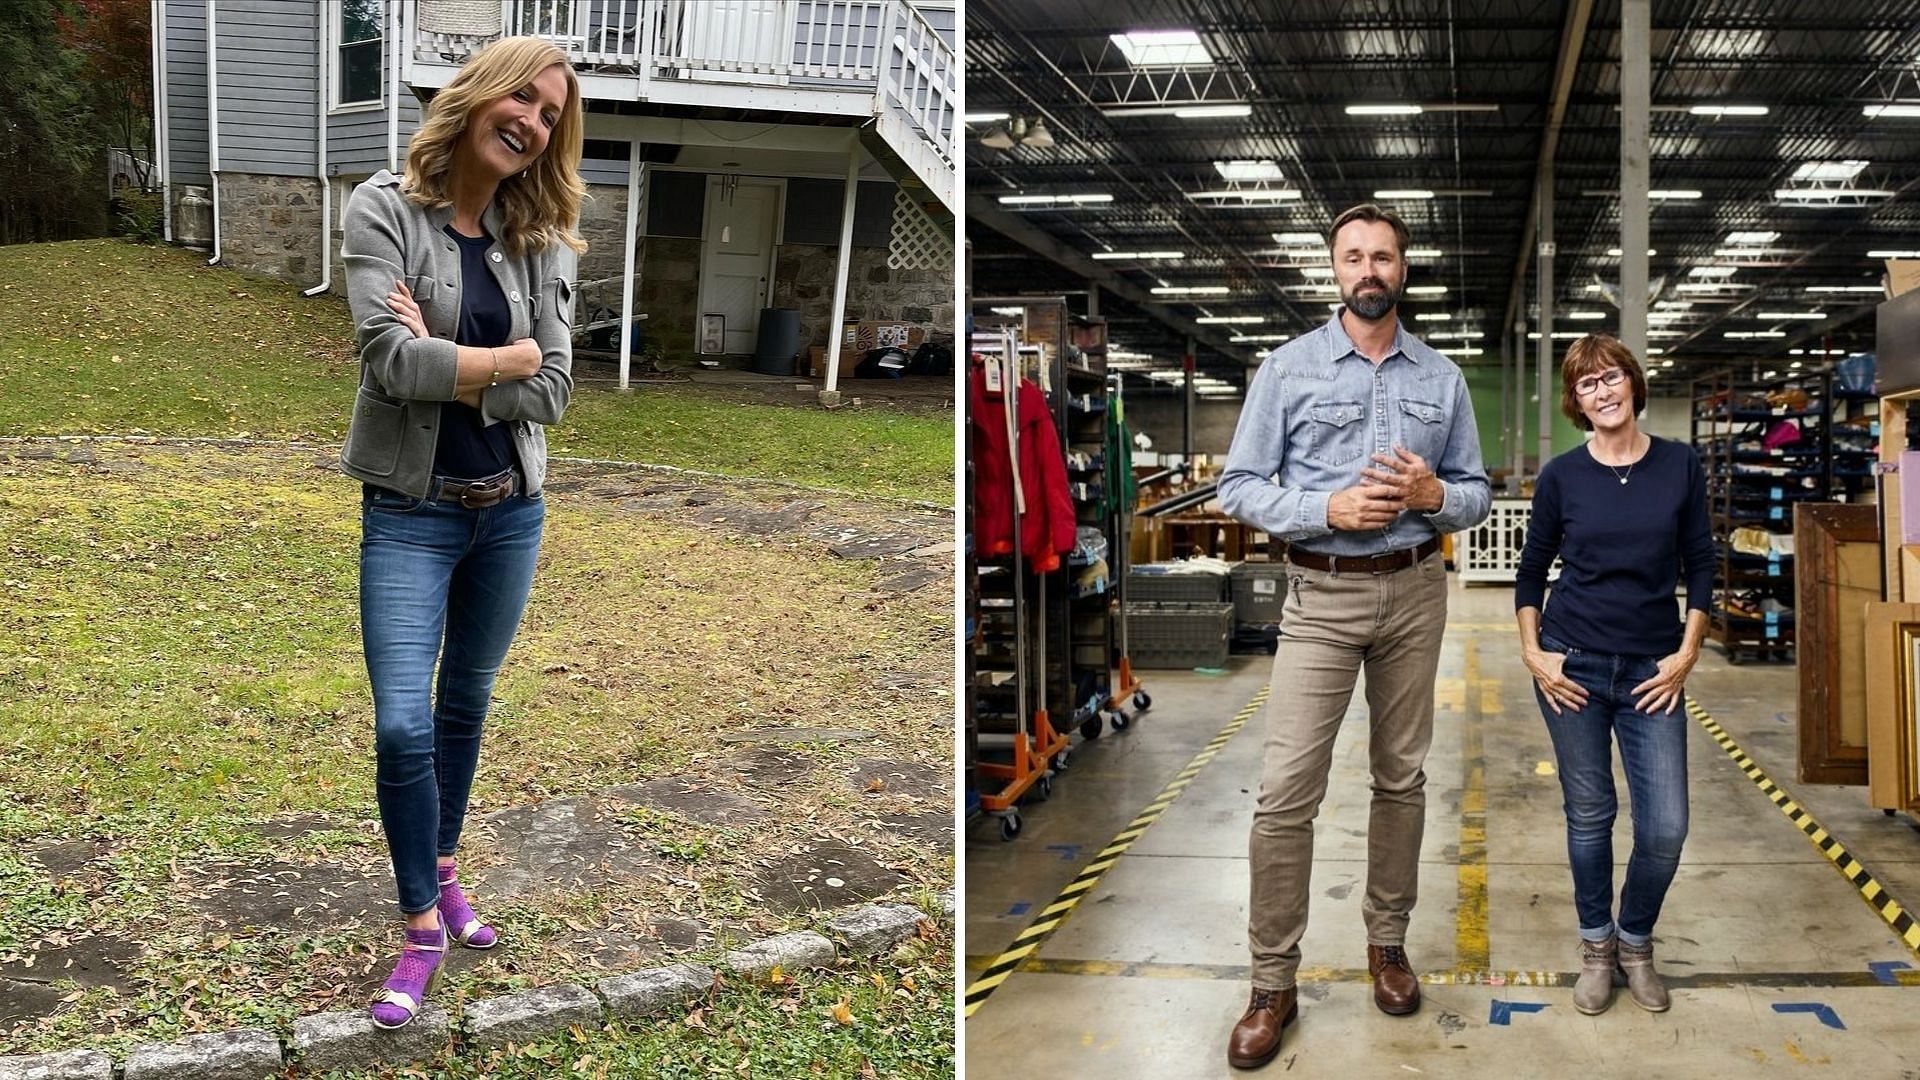 Everything But The House host Lara Spencer and the team start their search for antiques (Image via Instagram/lara.spencer)